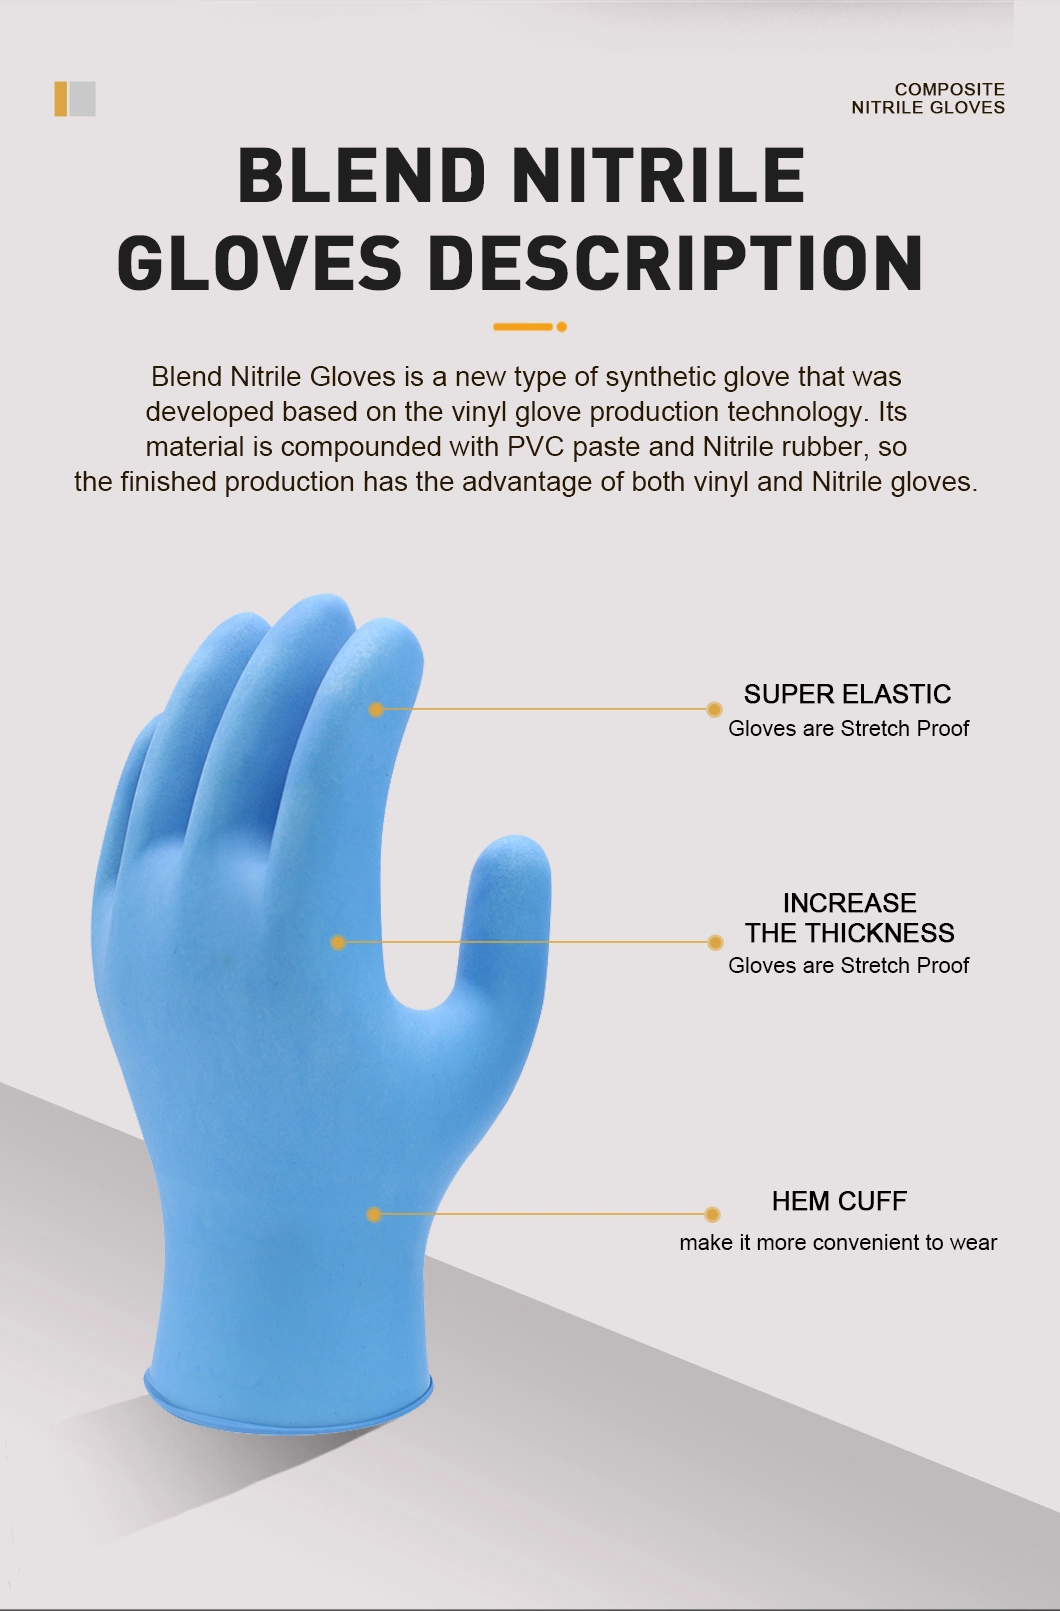 Free Nitrile Black Gloves Anti Acid Gloves Latex for Personal Use Safety Gloves